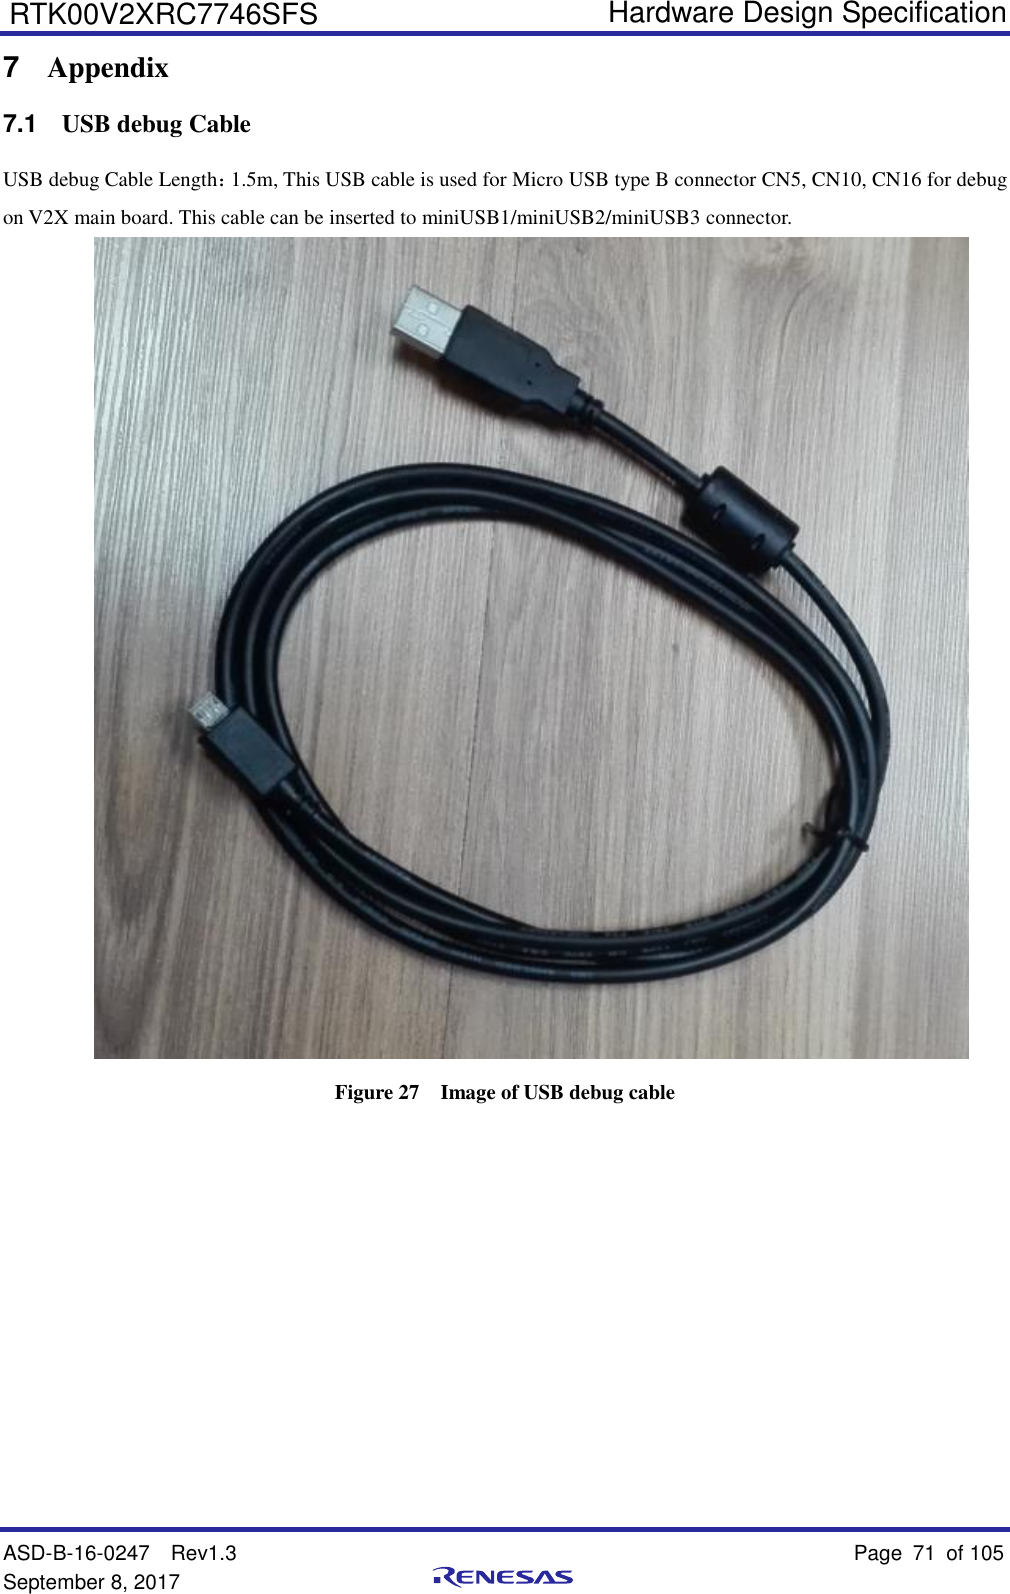   Hardware Design Specification ASD-B-16-0247  Rev1.3    Page 71  of 105 September 8, 2017      RTK00V2XRC7746SFS 7  Appendix 7.1  USB debug Cable USB debug Cable Length：1.5m, This USB cable is used for Micro USB type B connector CN5, CN10, CN16 for debug on V2X main board. This cable can be inserted to miniUSB1/miniUSB2/miniUSB3 connector.  Figure 27  Image of USB debug cable     